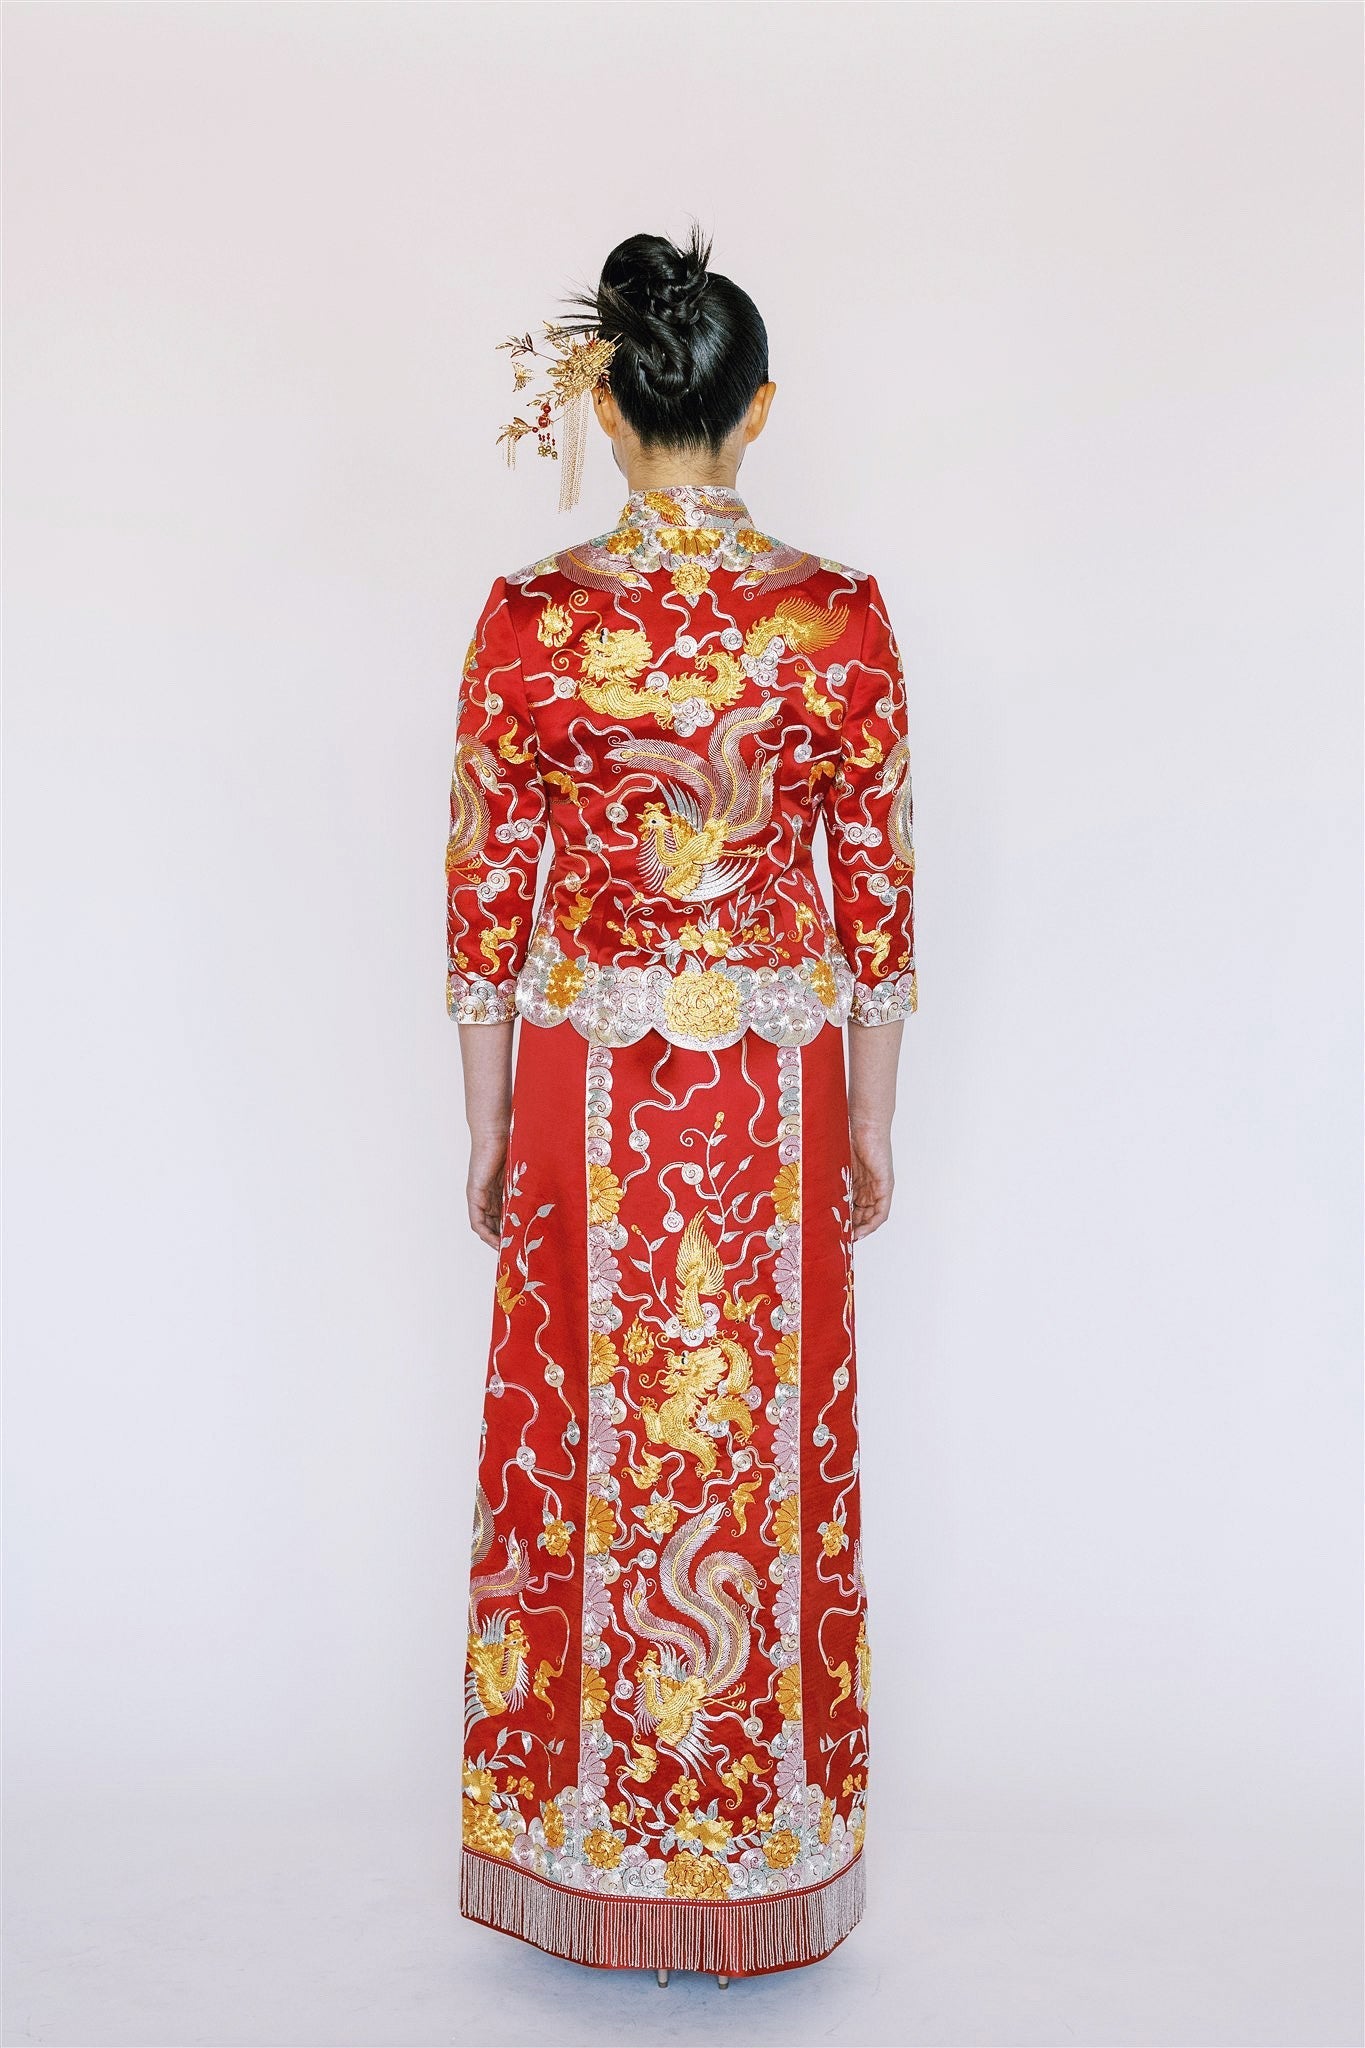 Jinza Oriental Couture Chinese Tea Ceremony Dress Chinese Tea Ceremony Dress | Qun Kwa with Hand-Embroidered Gold and Silver Phoenix